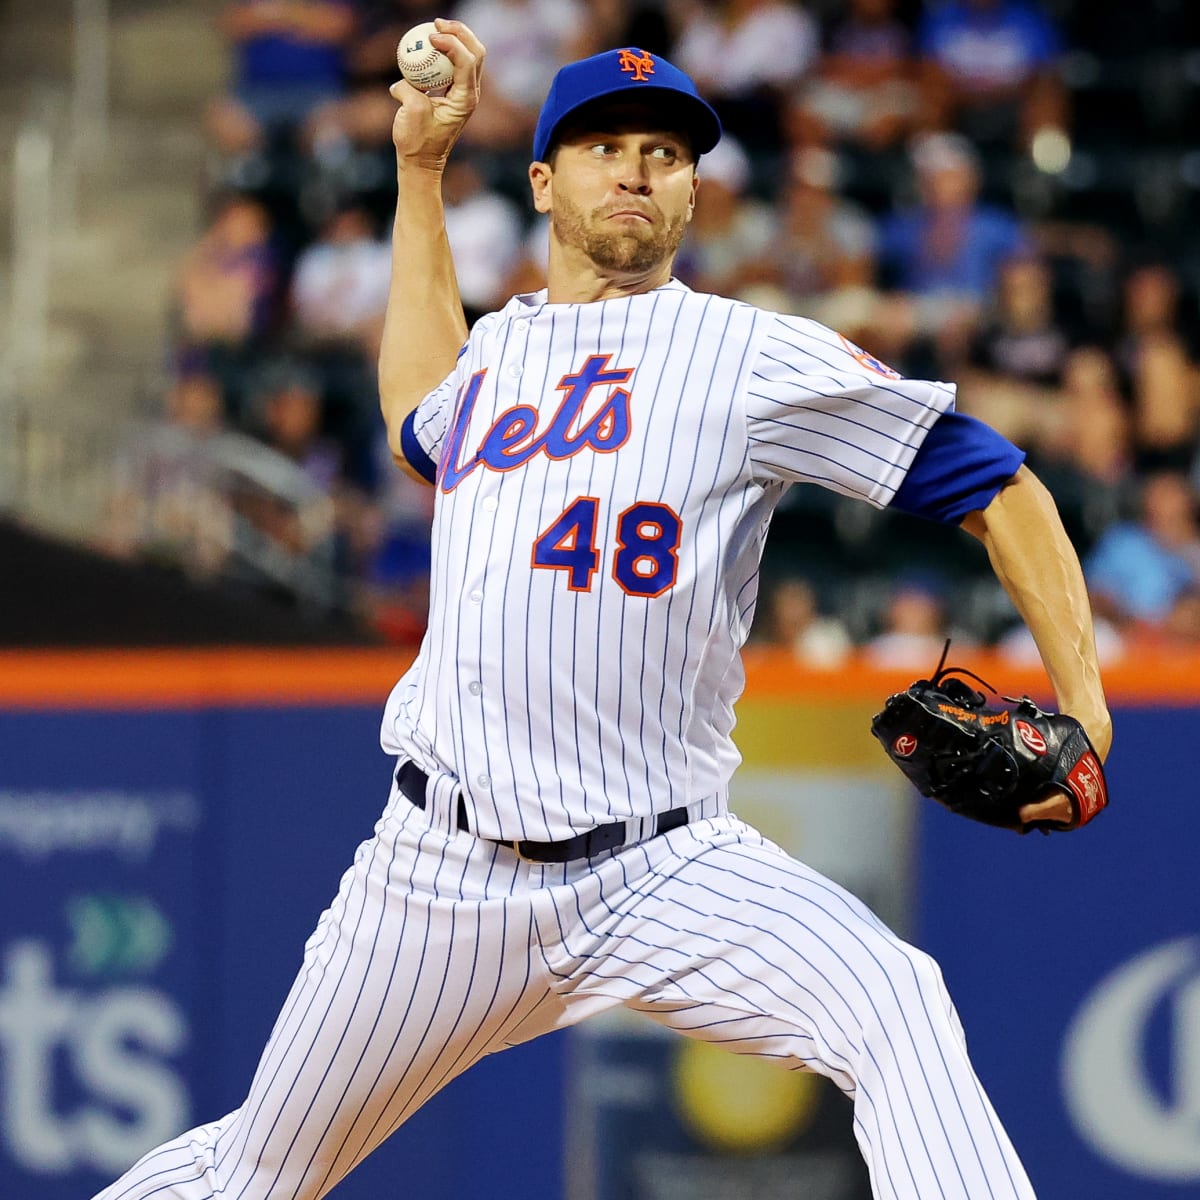 Mets season review: Jacob deGrom went out on a high note in 2022 - Amazin'  Avenue